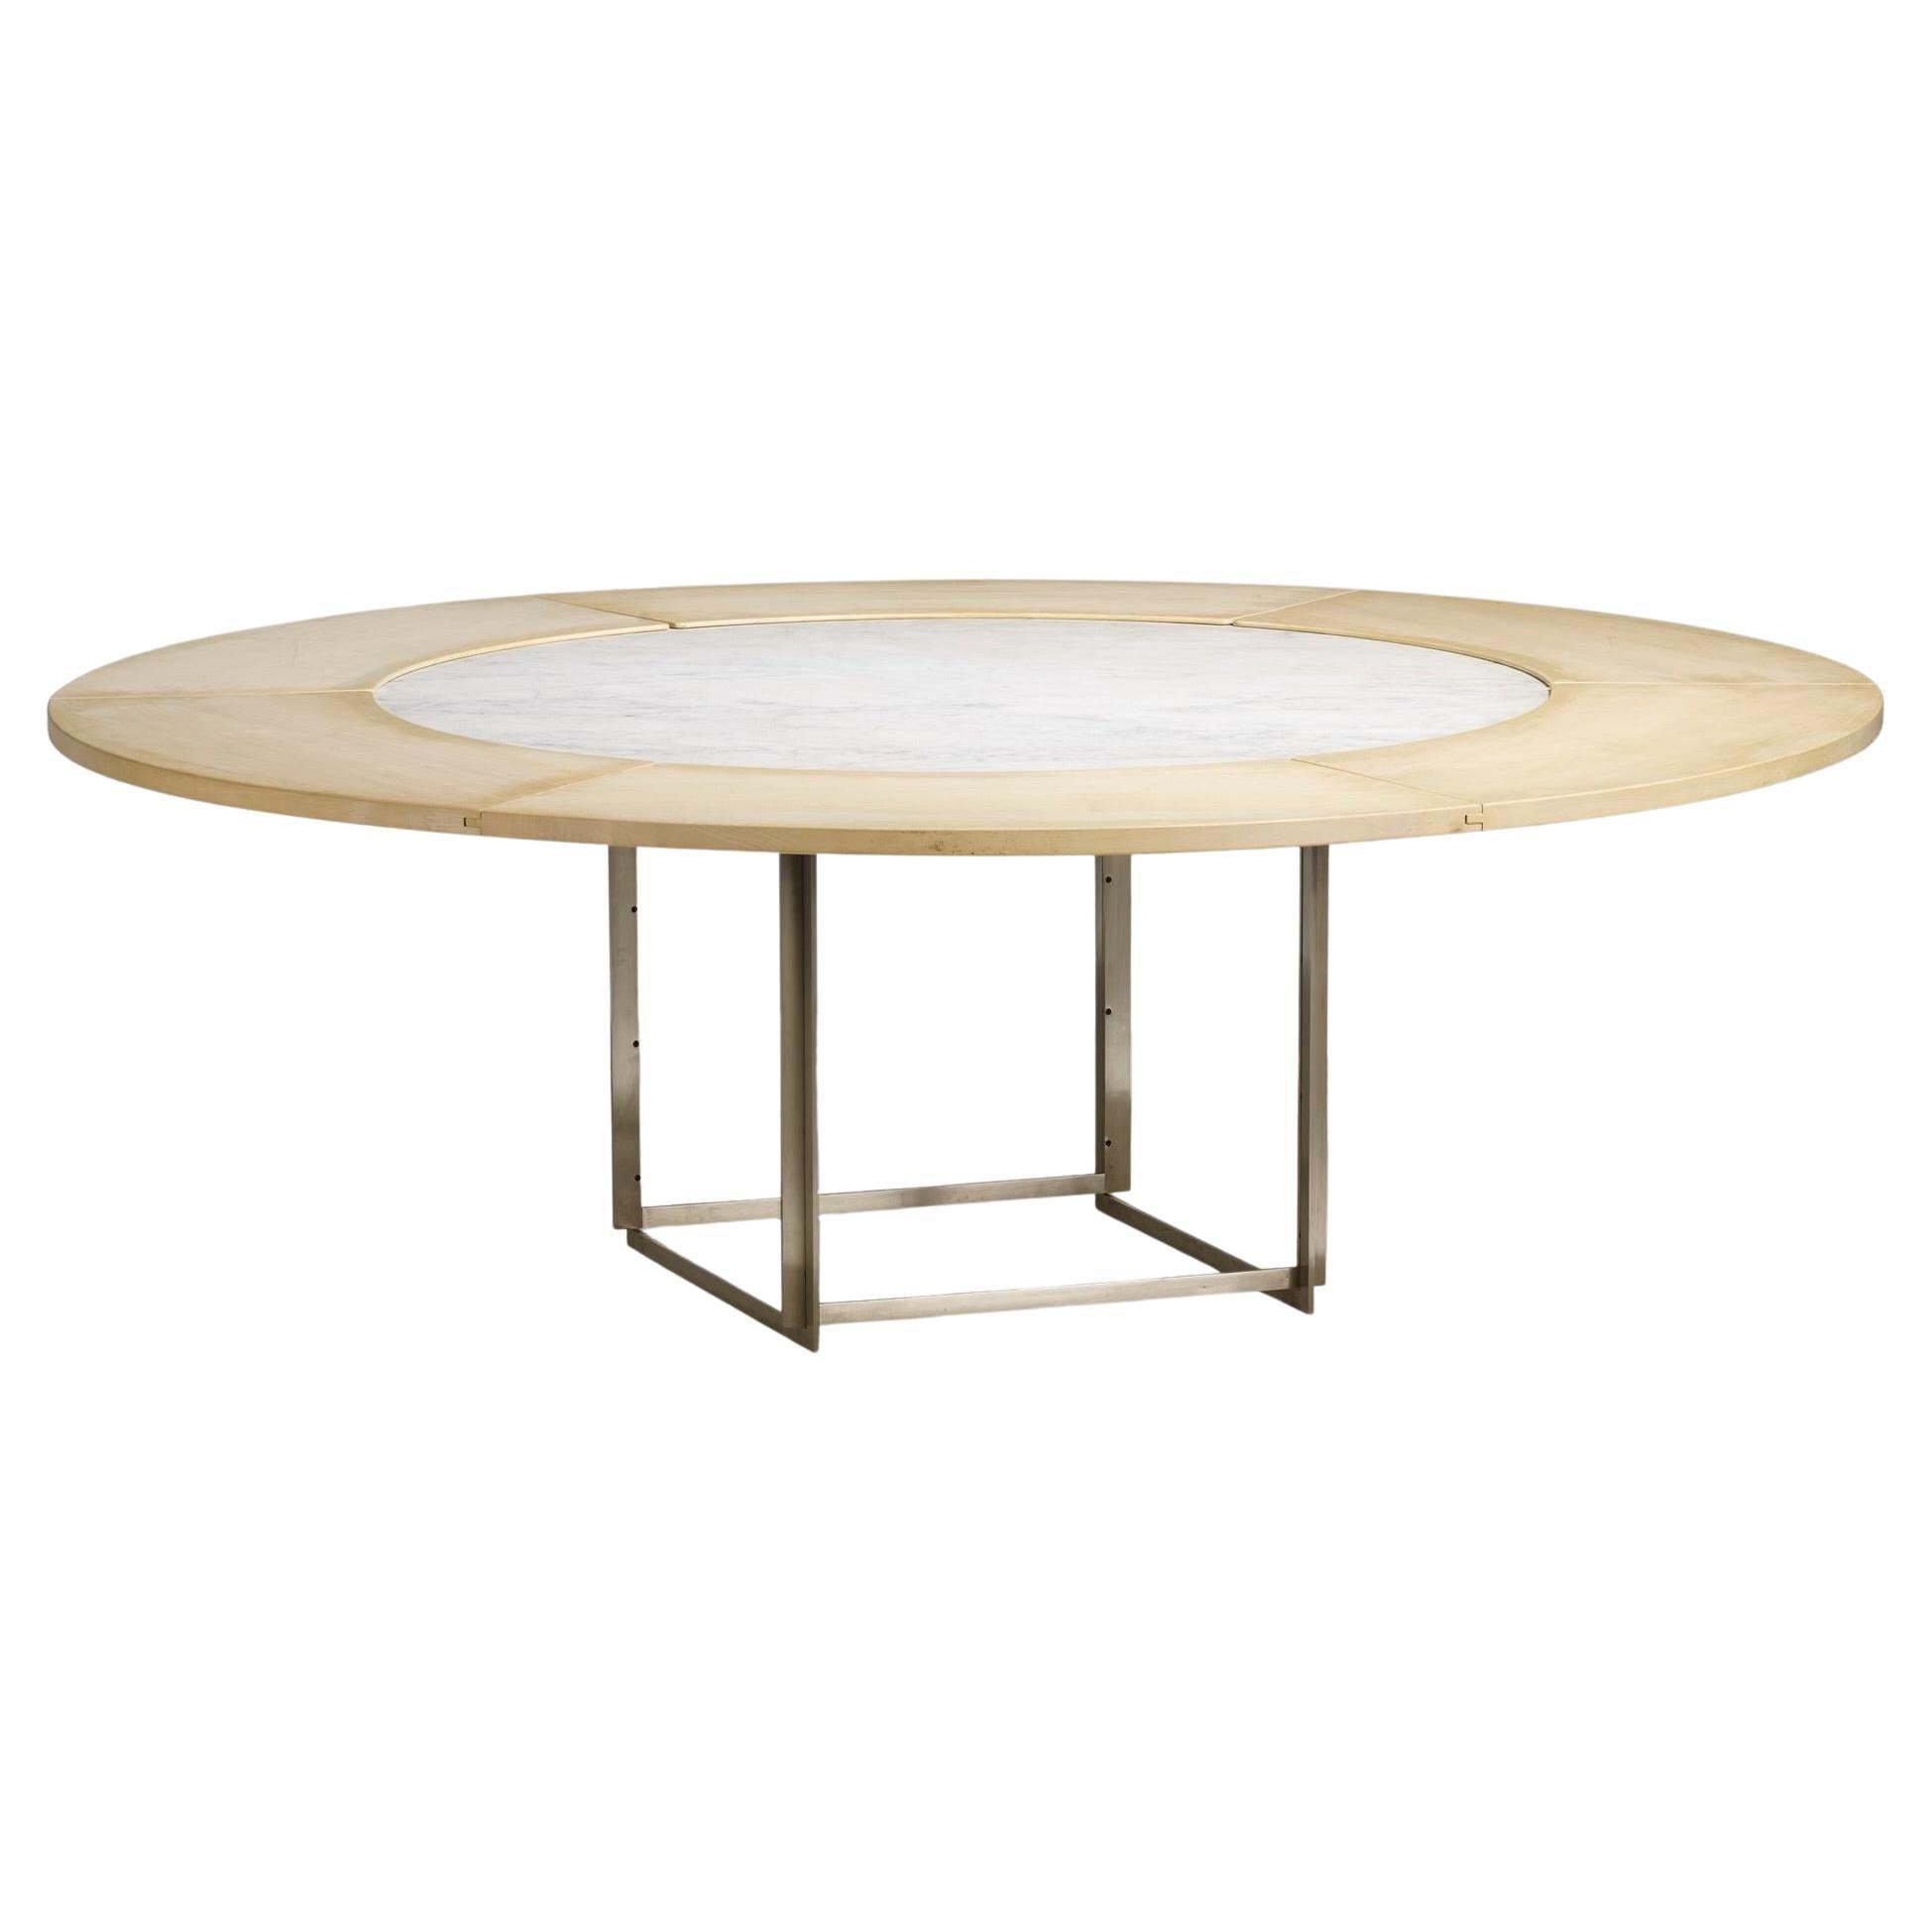 Poul Kjaerholm Marble and Maple PK54 Round Dining Table